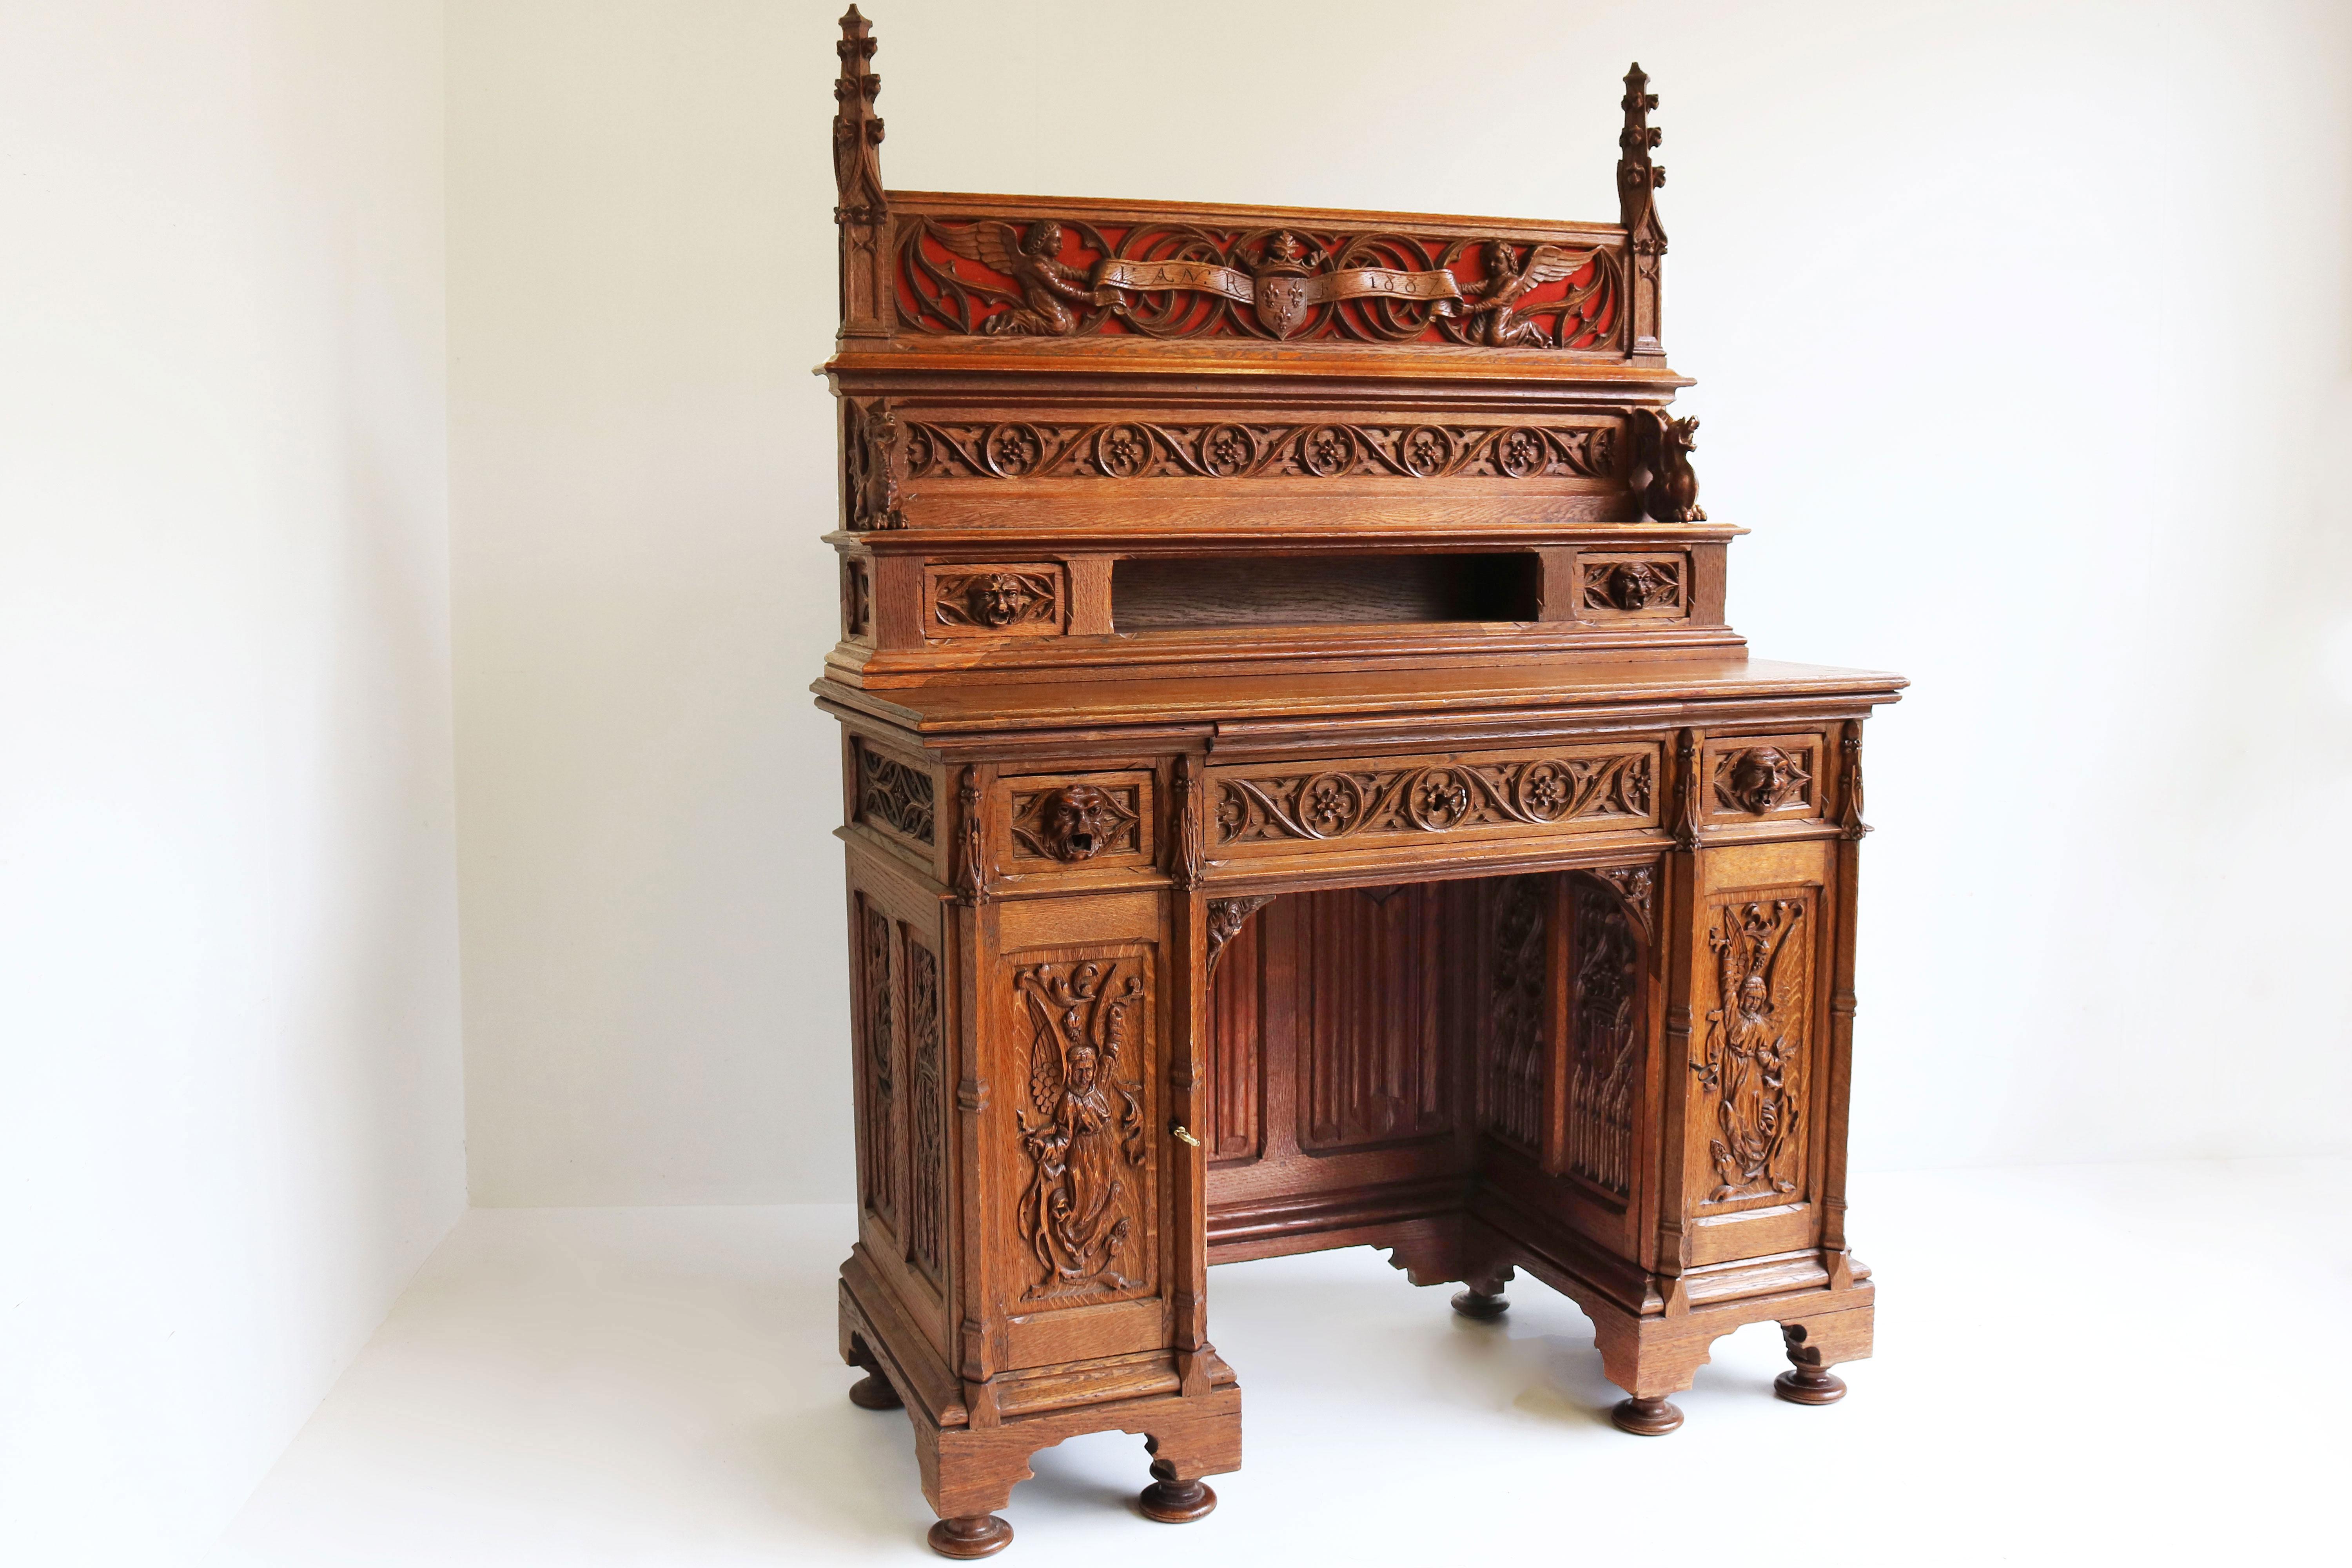 French Rare Gothic Revival Writing Desk Carved Oak Antique 19th Century Angels Dragons For Sale